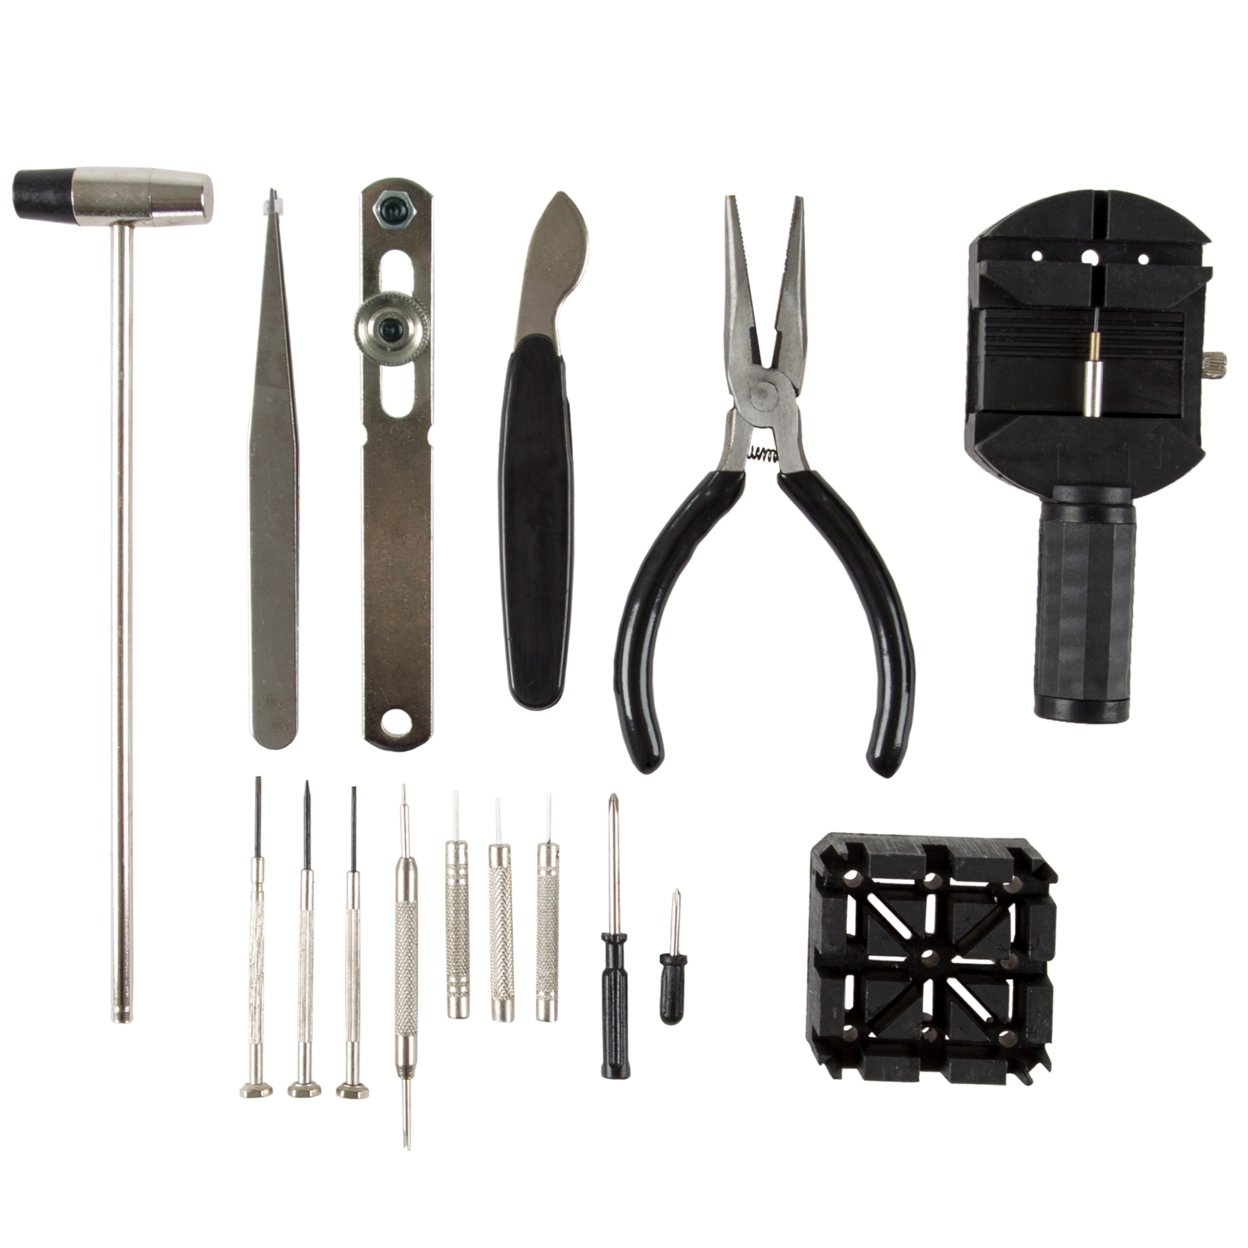 16 Piece Watch Repair Kit- DIY Tool Set For Repairing Watches Includes Screwdrivers, Spring Bar Remover, Tweezers And More